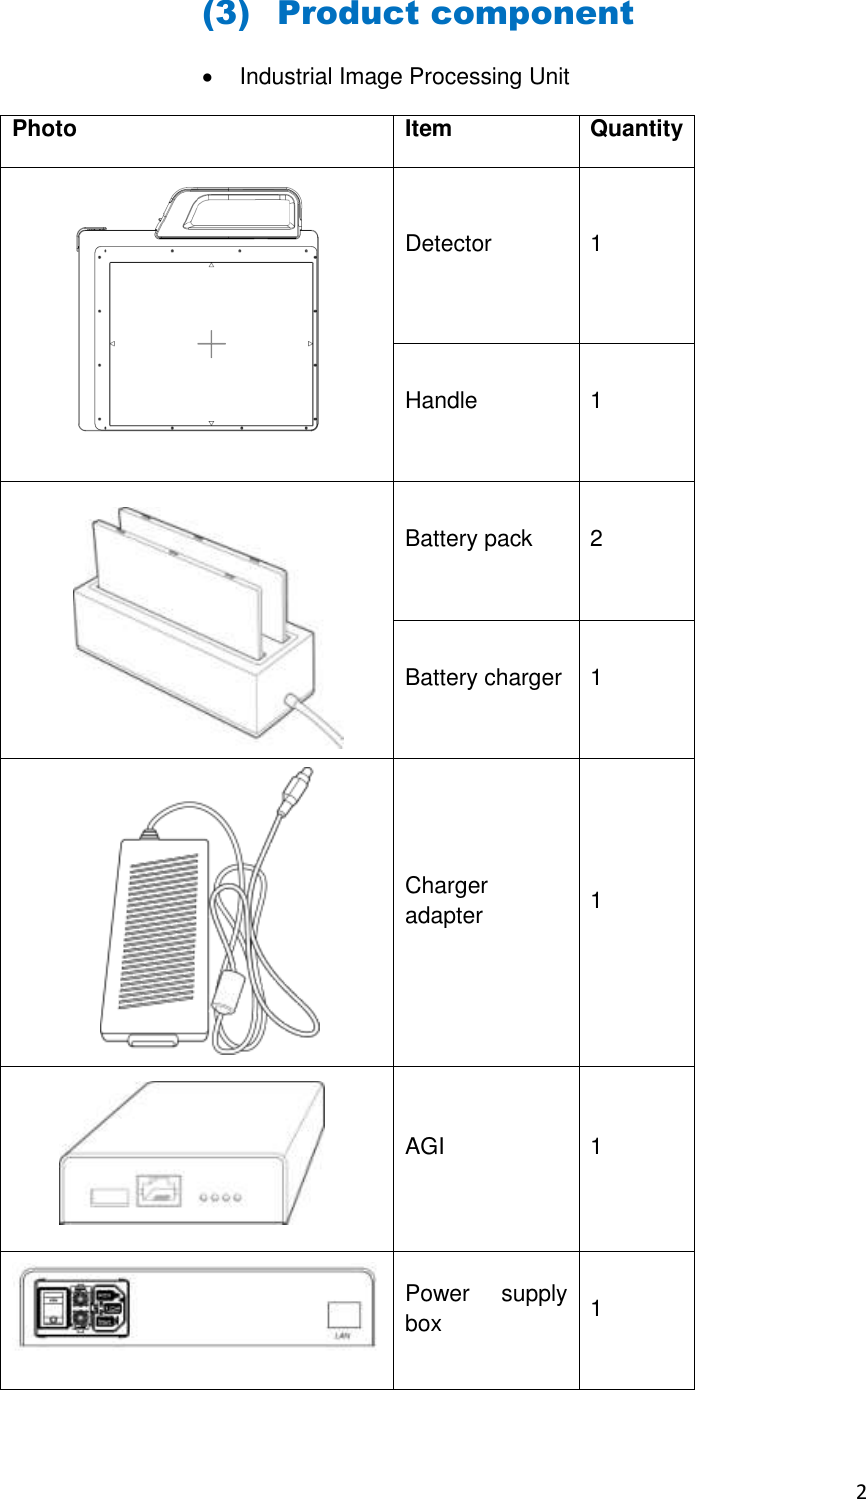 2  (3) Product component   Industrial Image Processing Unit Photo Item Quantity  Detector 1 Handle 1  Battery pack 2 Battery charger 1       Charger adapter 1     AGI 1  Power  supply box  1 